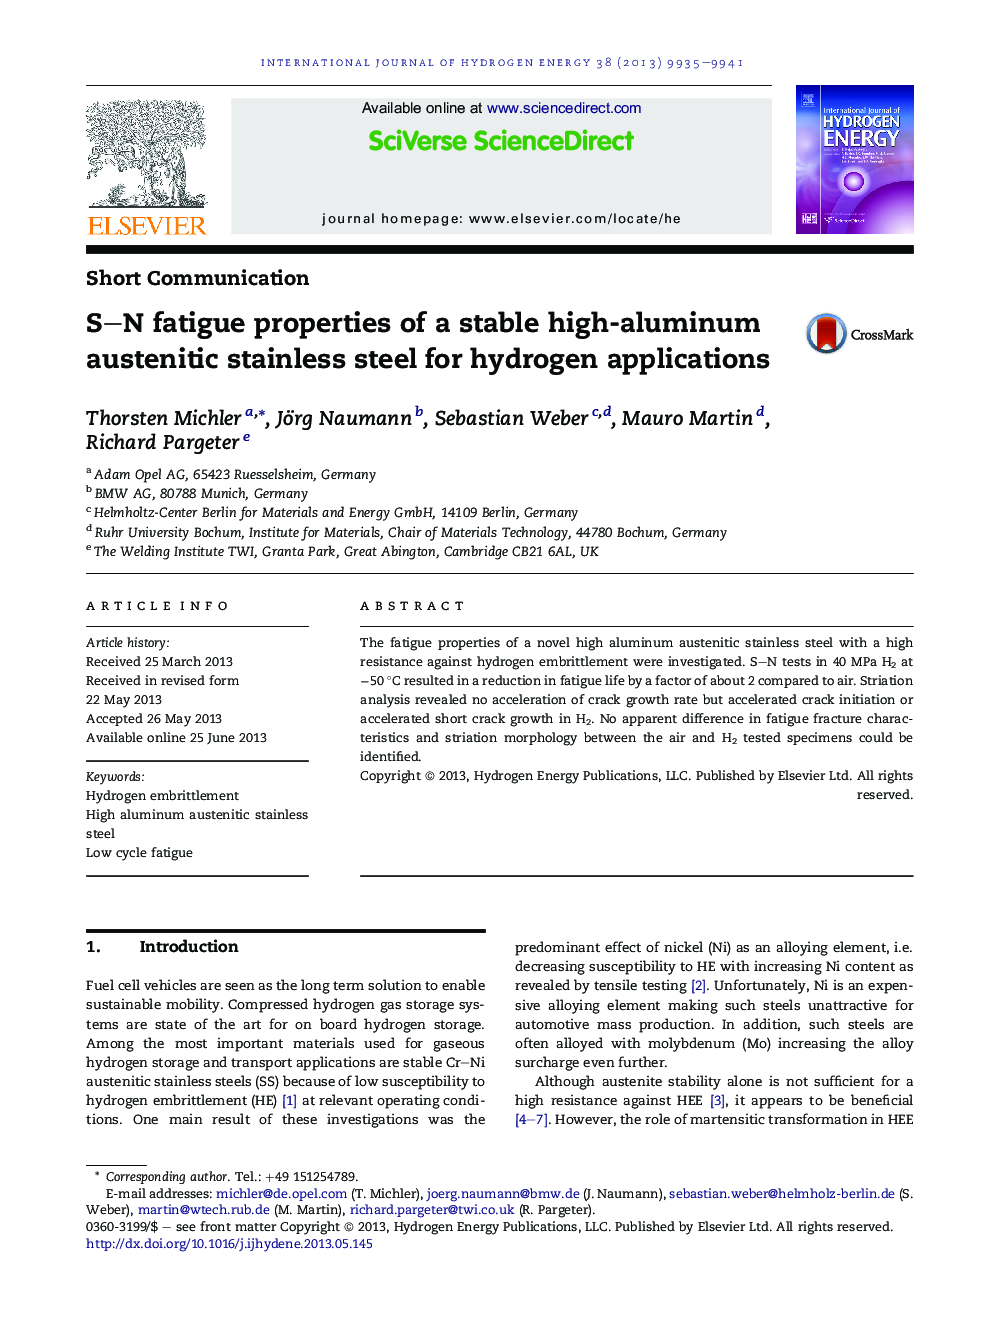 S-N fatigue properties of a stable high-aluminum austenitic stainless steel for hydrogen applications